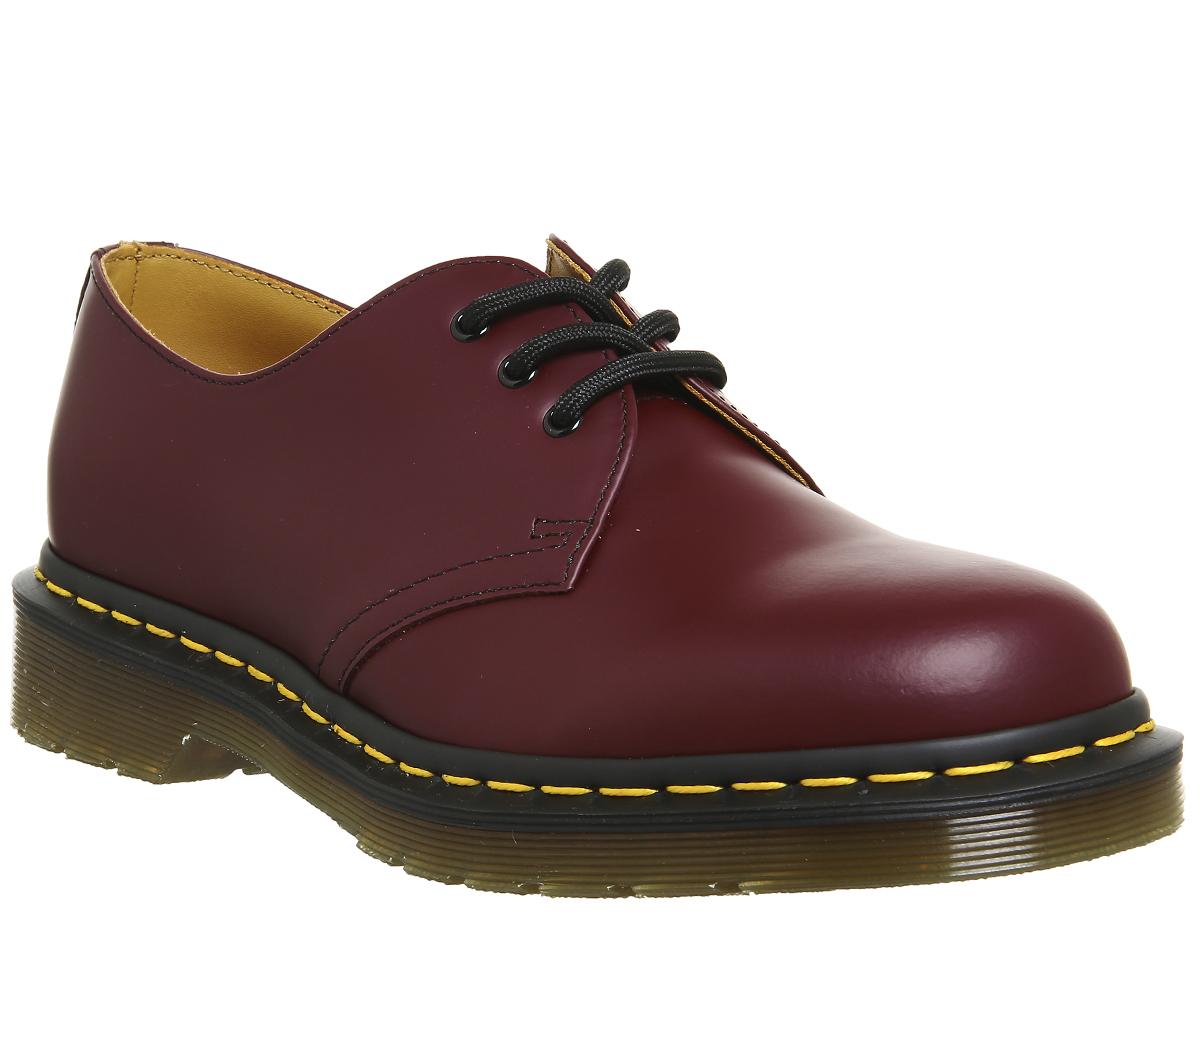 Dr. Martens 3 Eyelet Shoes Cherry Red - Flats